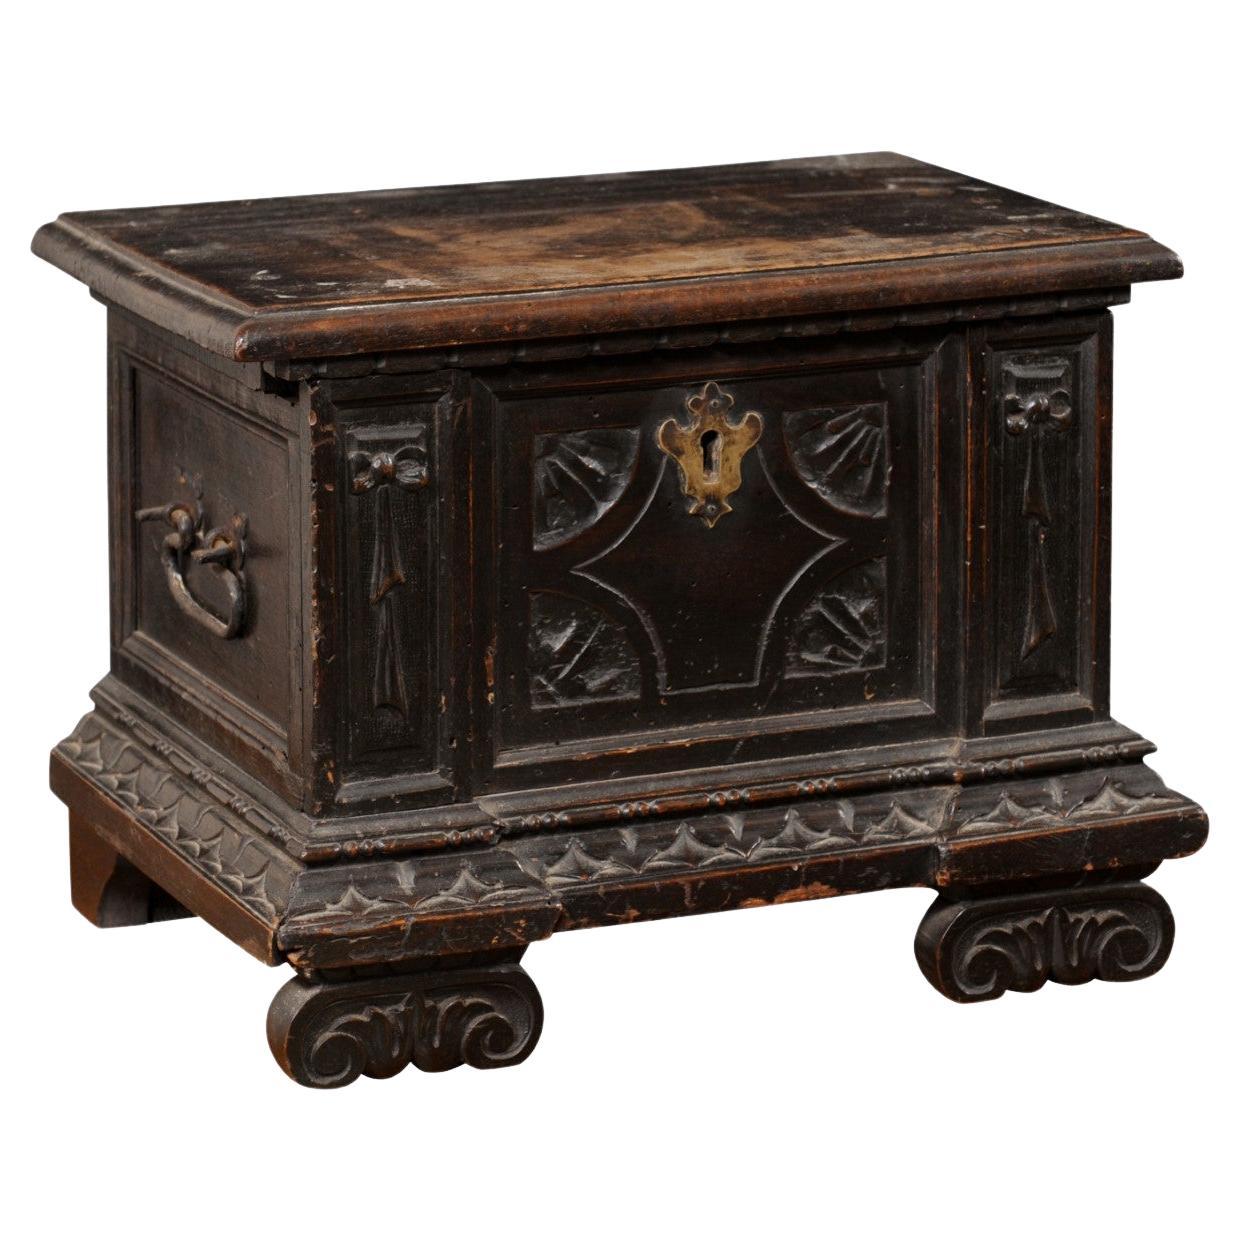 Late 18th C. English Carved Wood Document Box